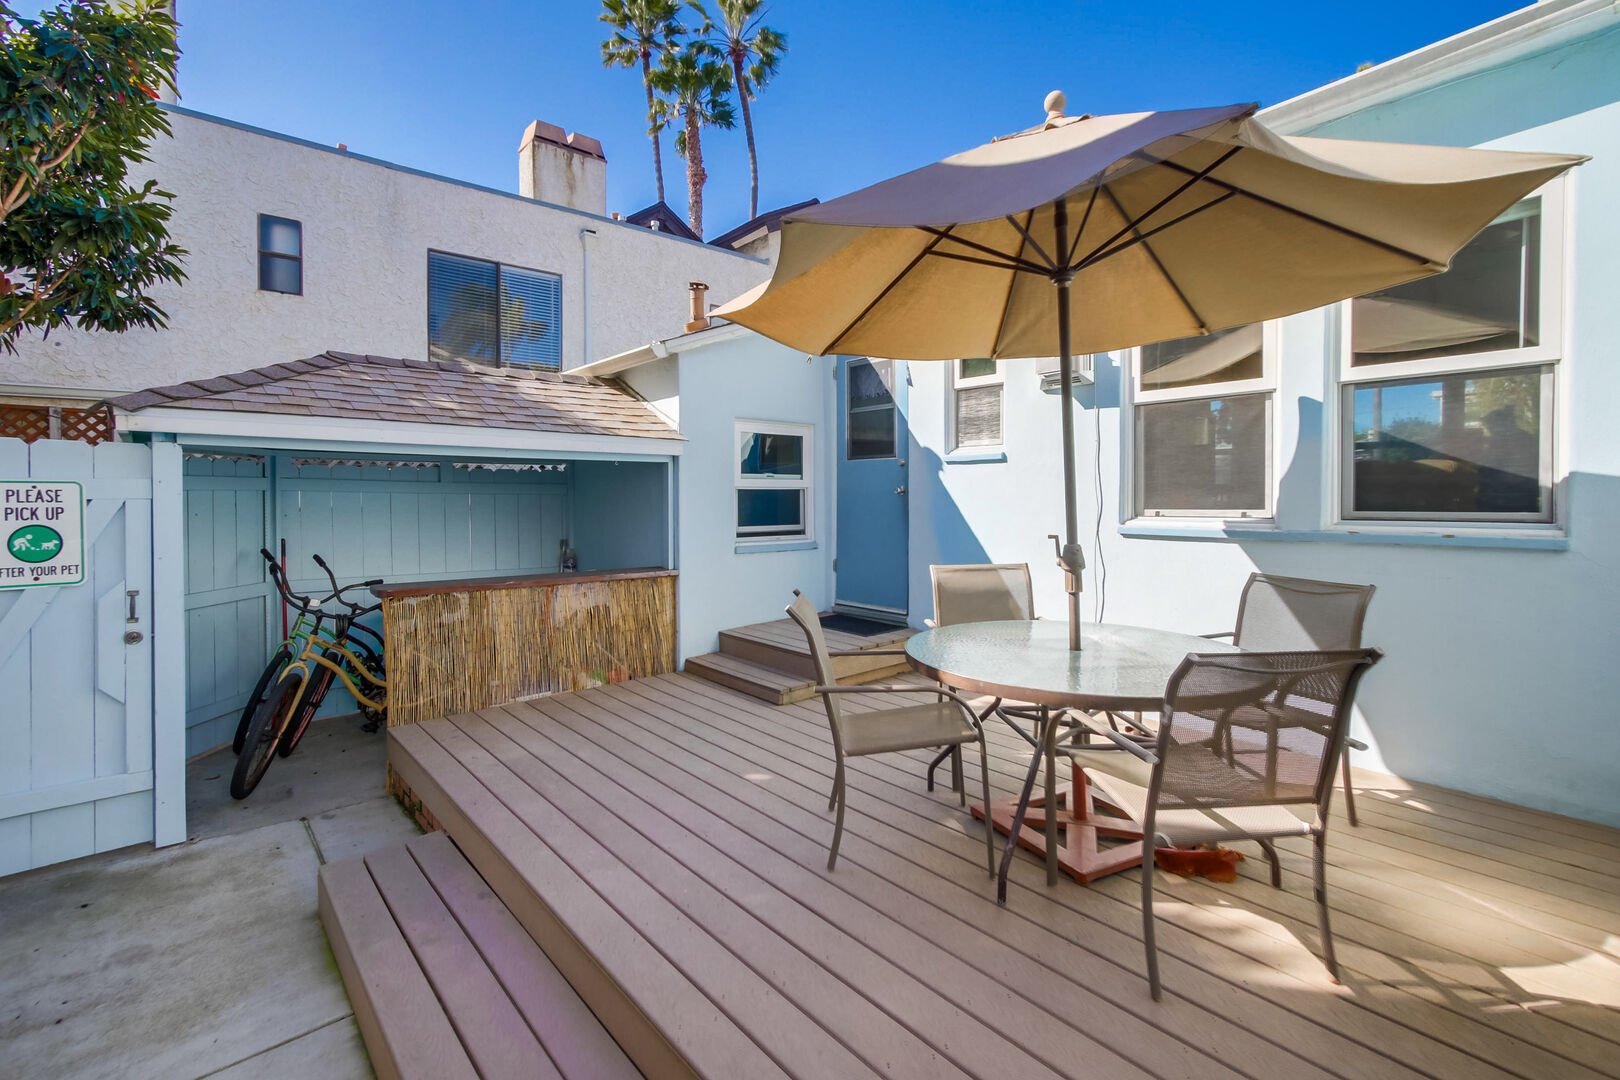 Large patio space with dining, BBQ, beach accessories, artificial grass - fully enclosed yard, great for meals under the stairs, furry friends, and entertaining!